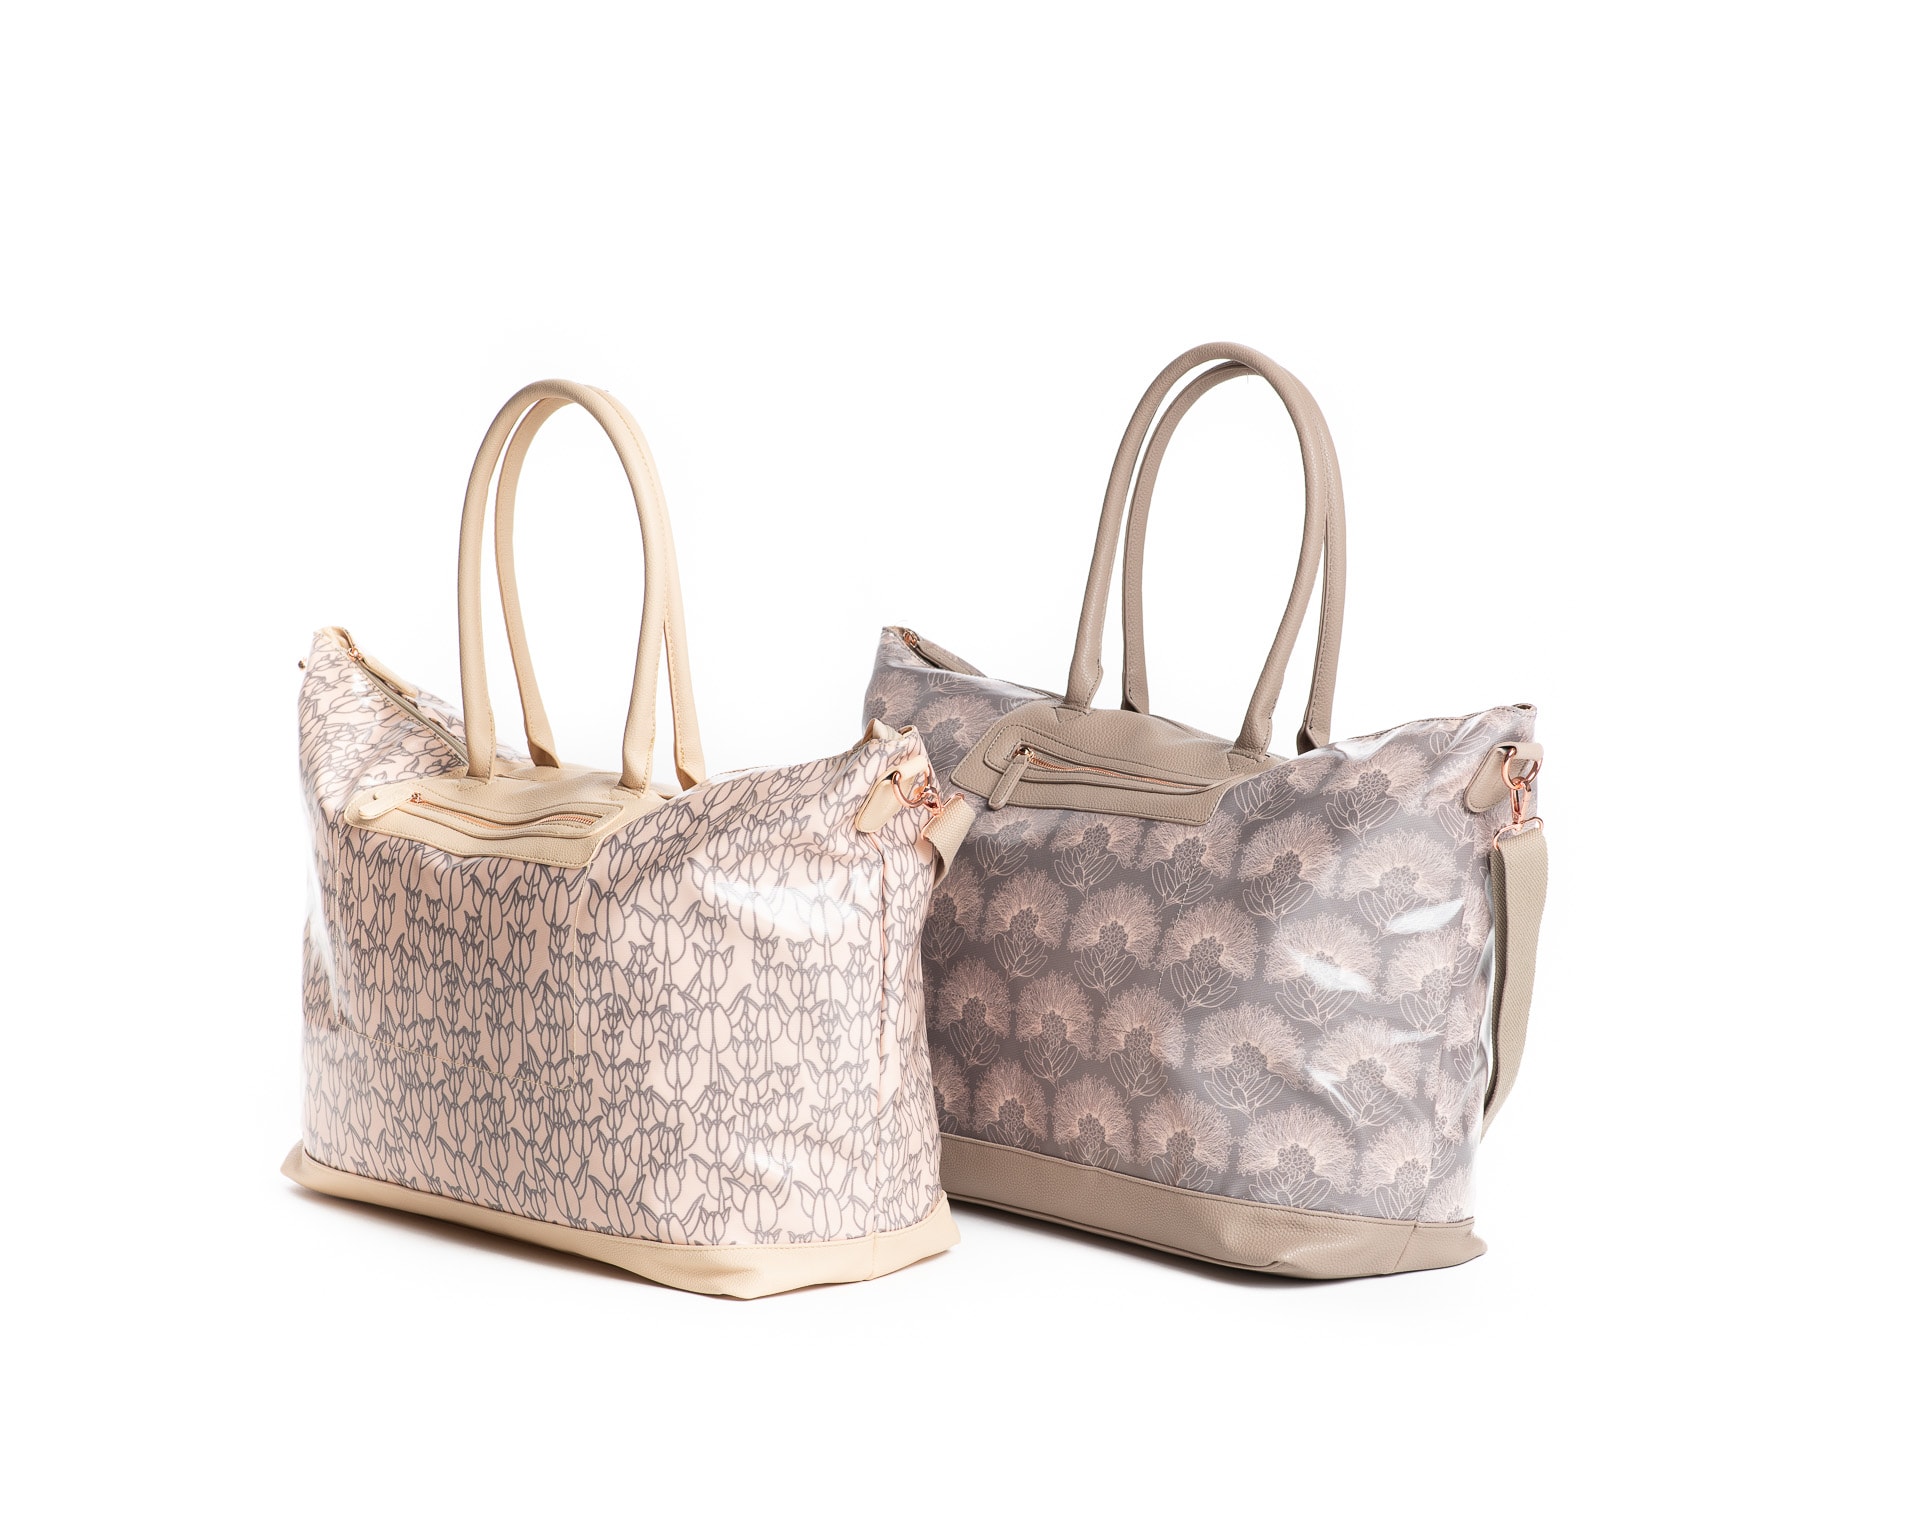 Waonahele Tote Duo in Apricot Sherbert and Gingersnap